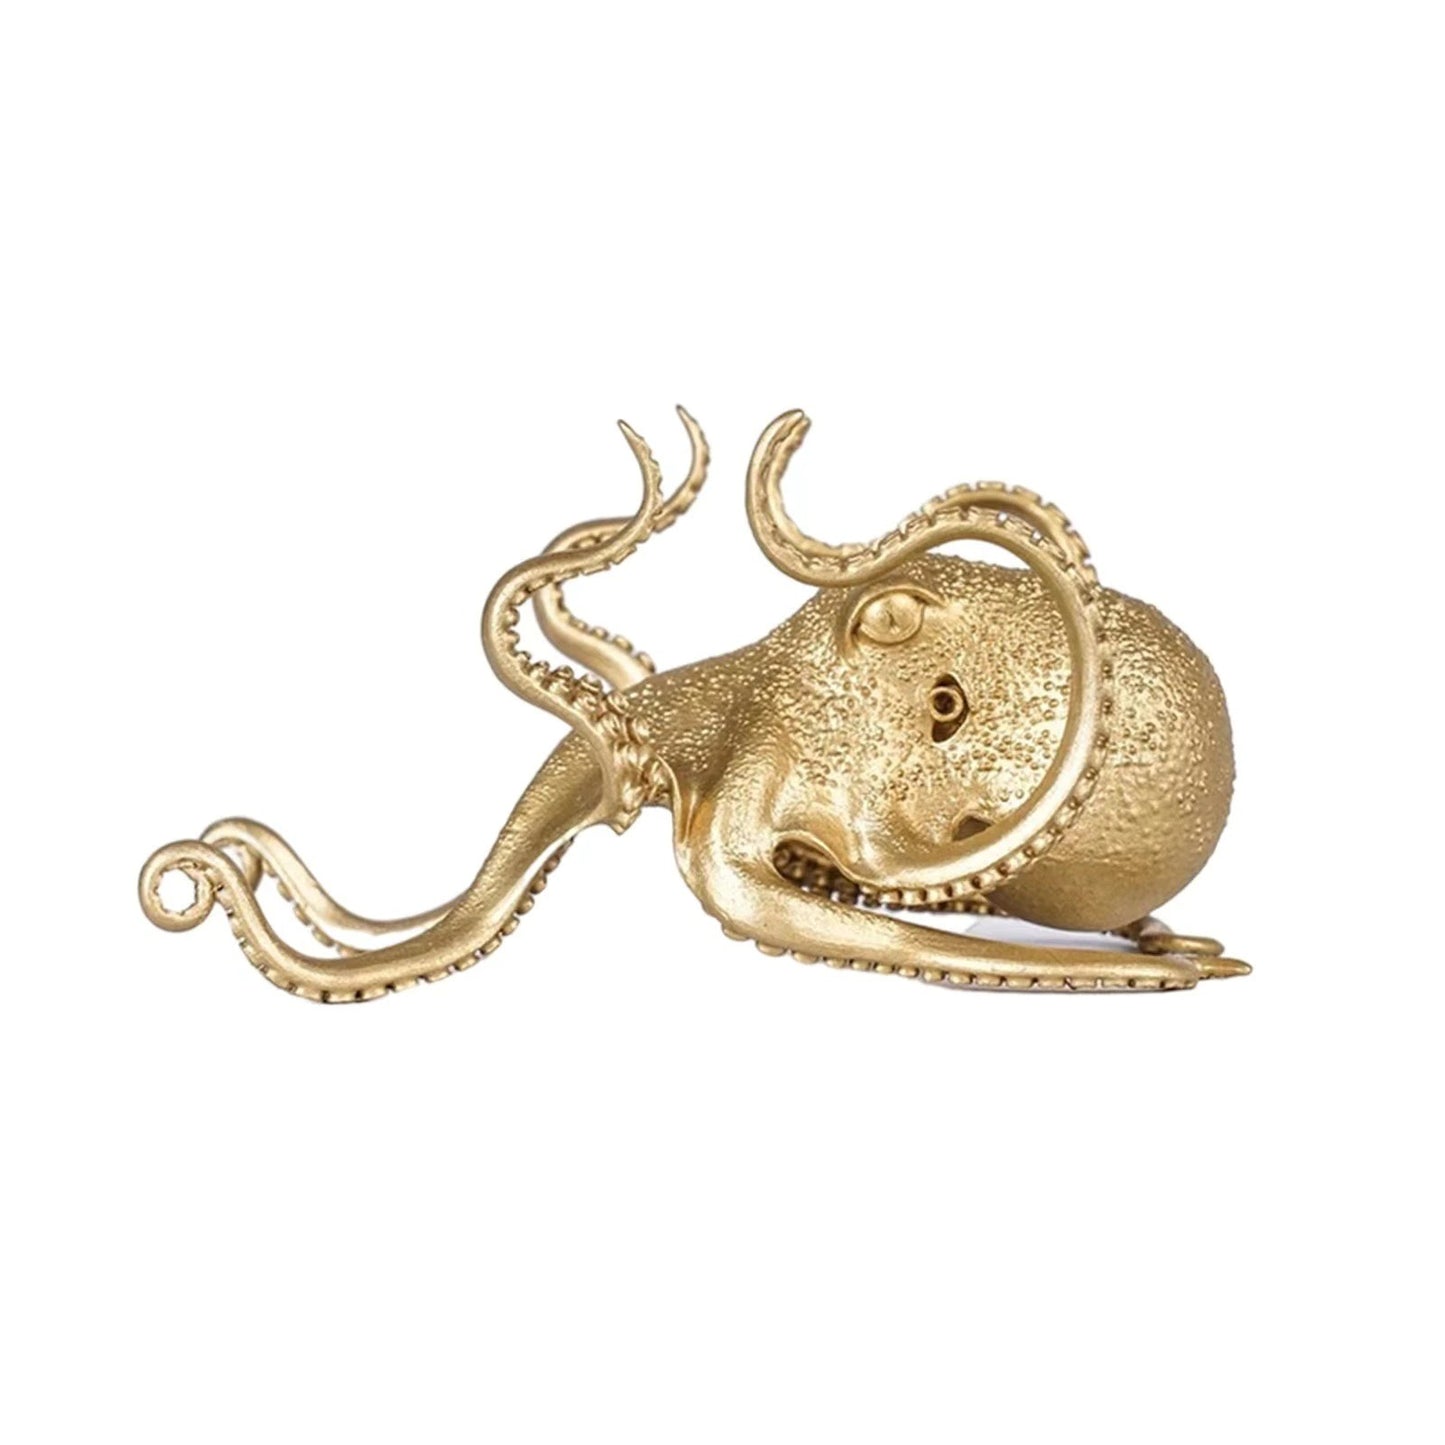 An octopus shaped mobile phone holder which can hold a mobile phone.